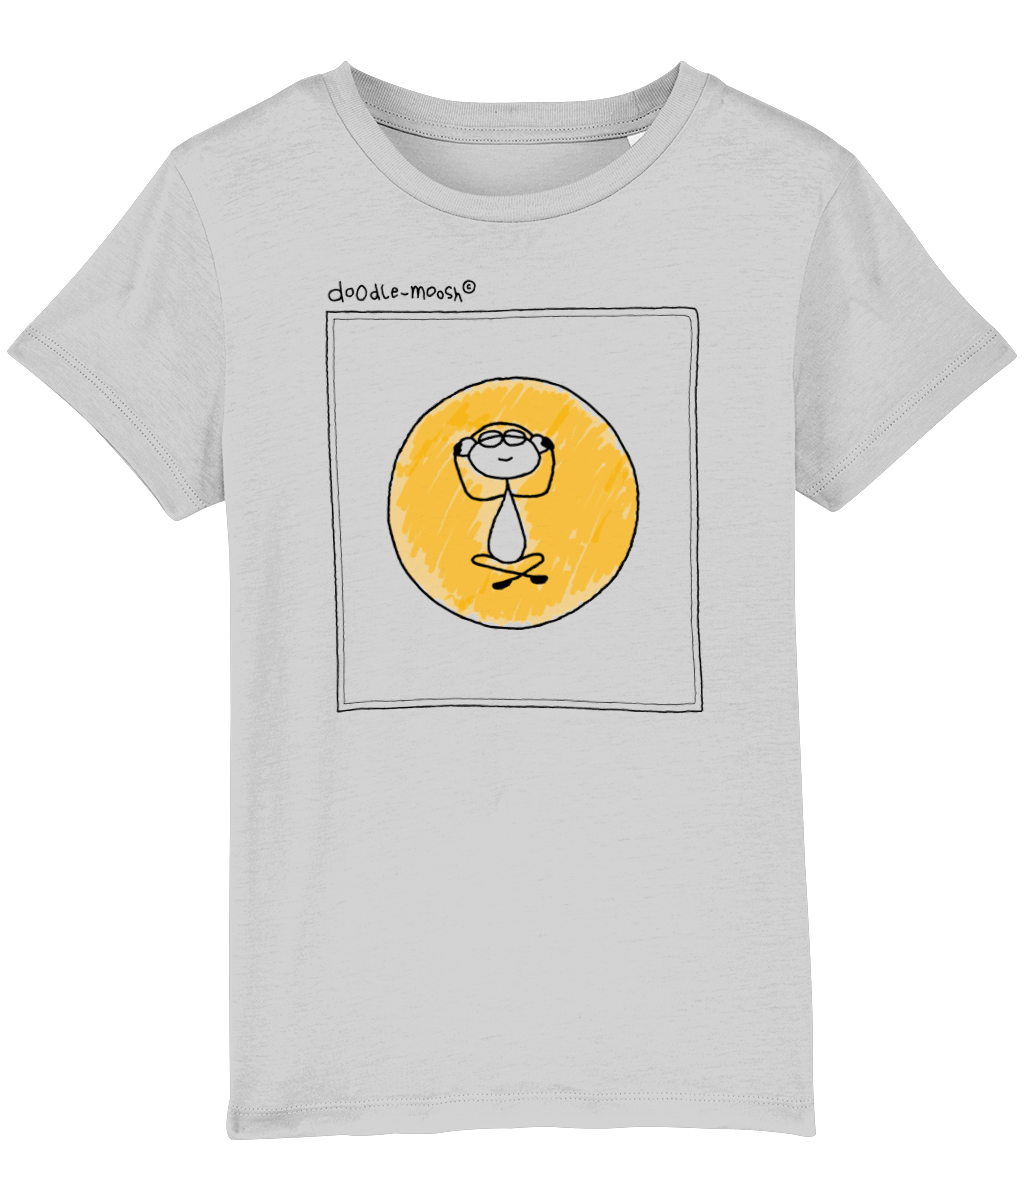 tuned in t-shirt, grey with black, colourful  drawing